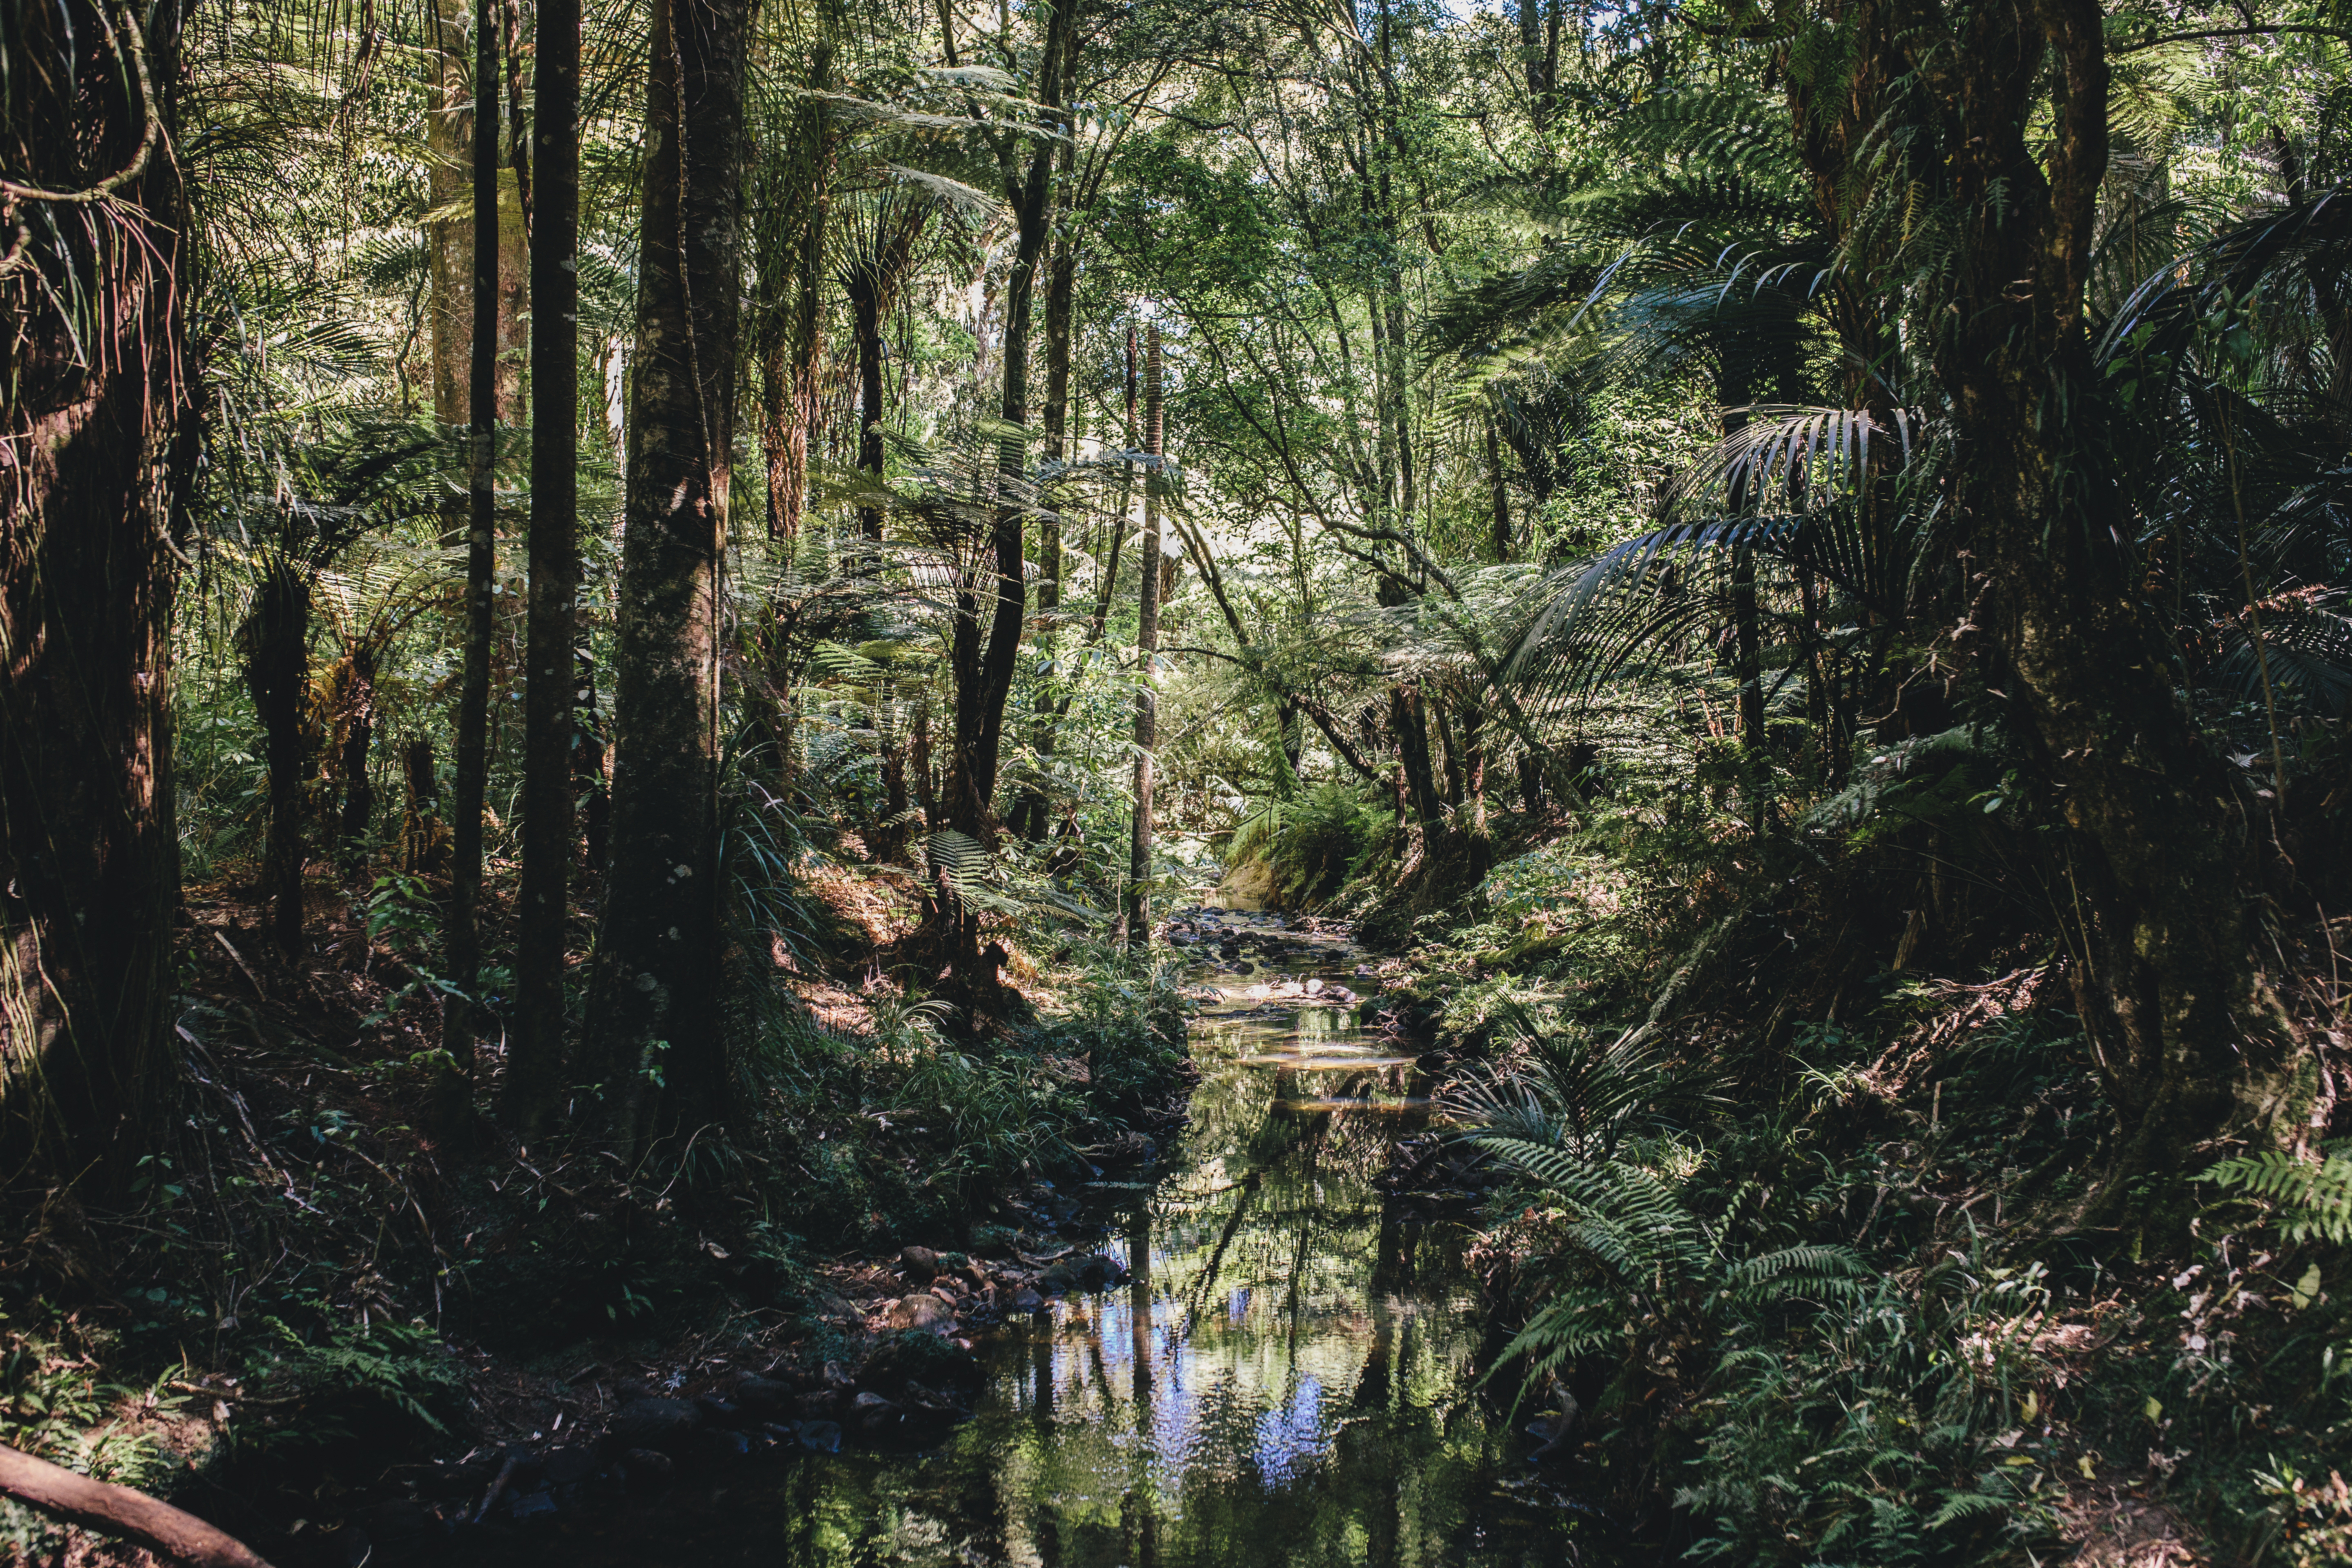 Image of the Puhinui river in a natural and healthy state.